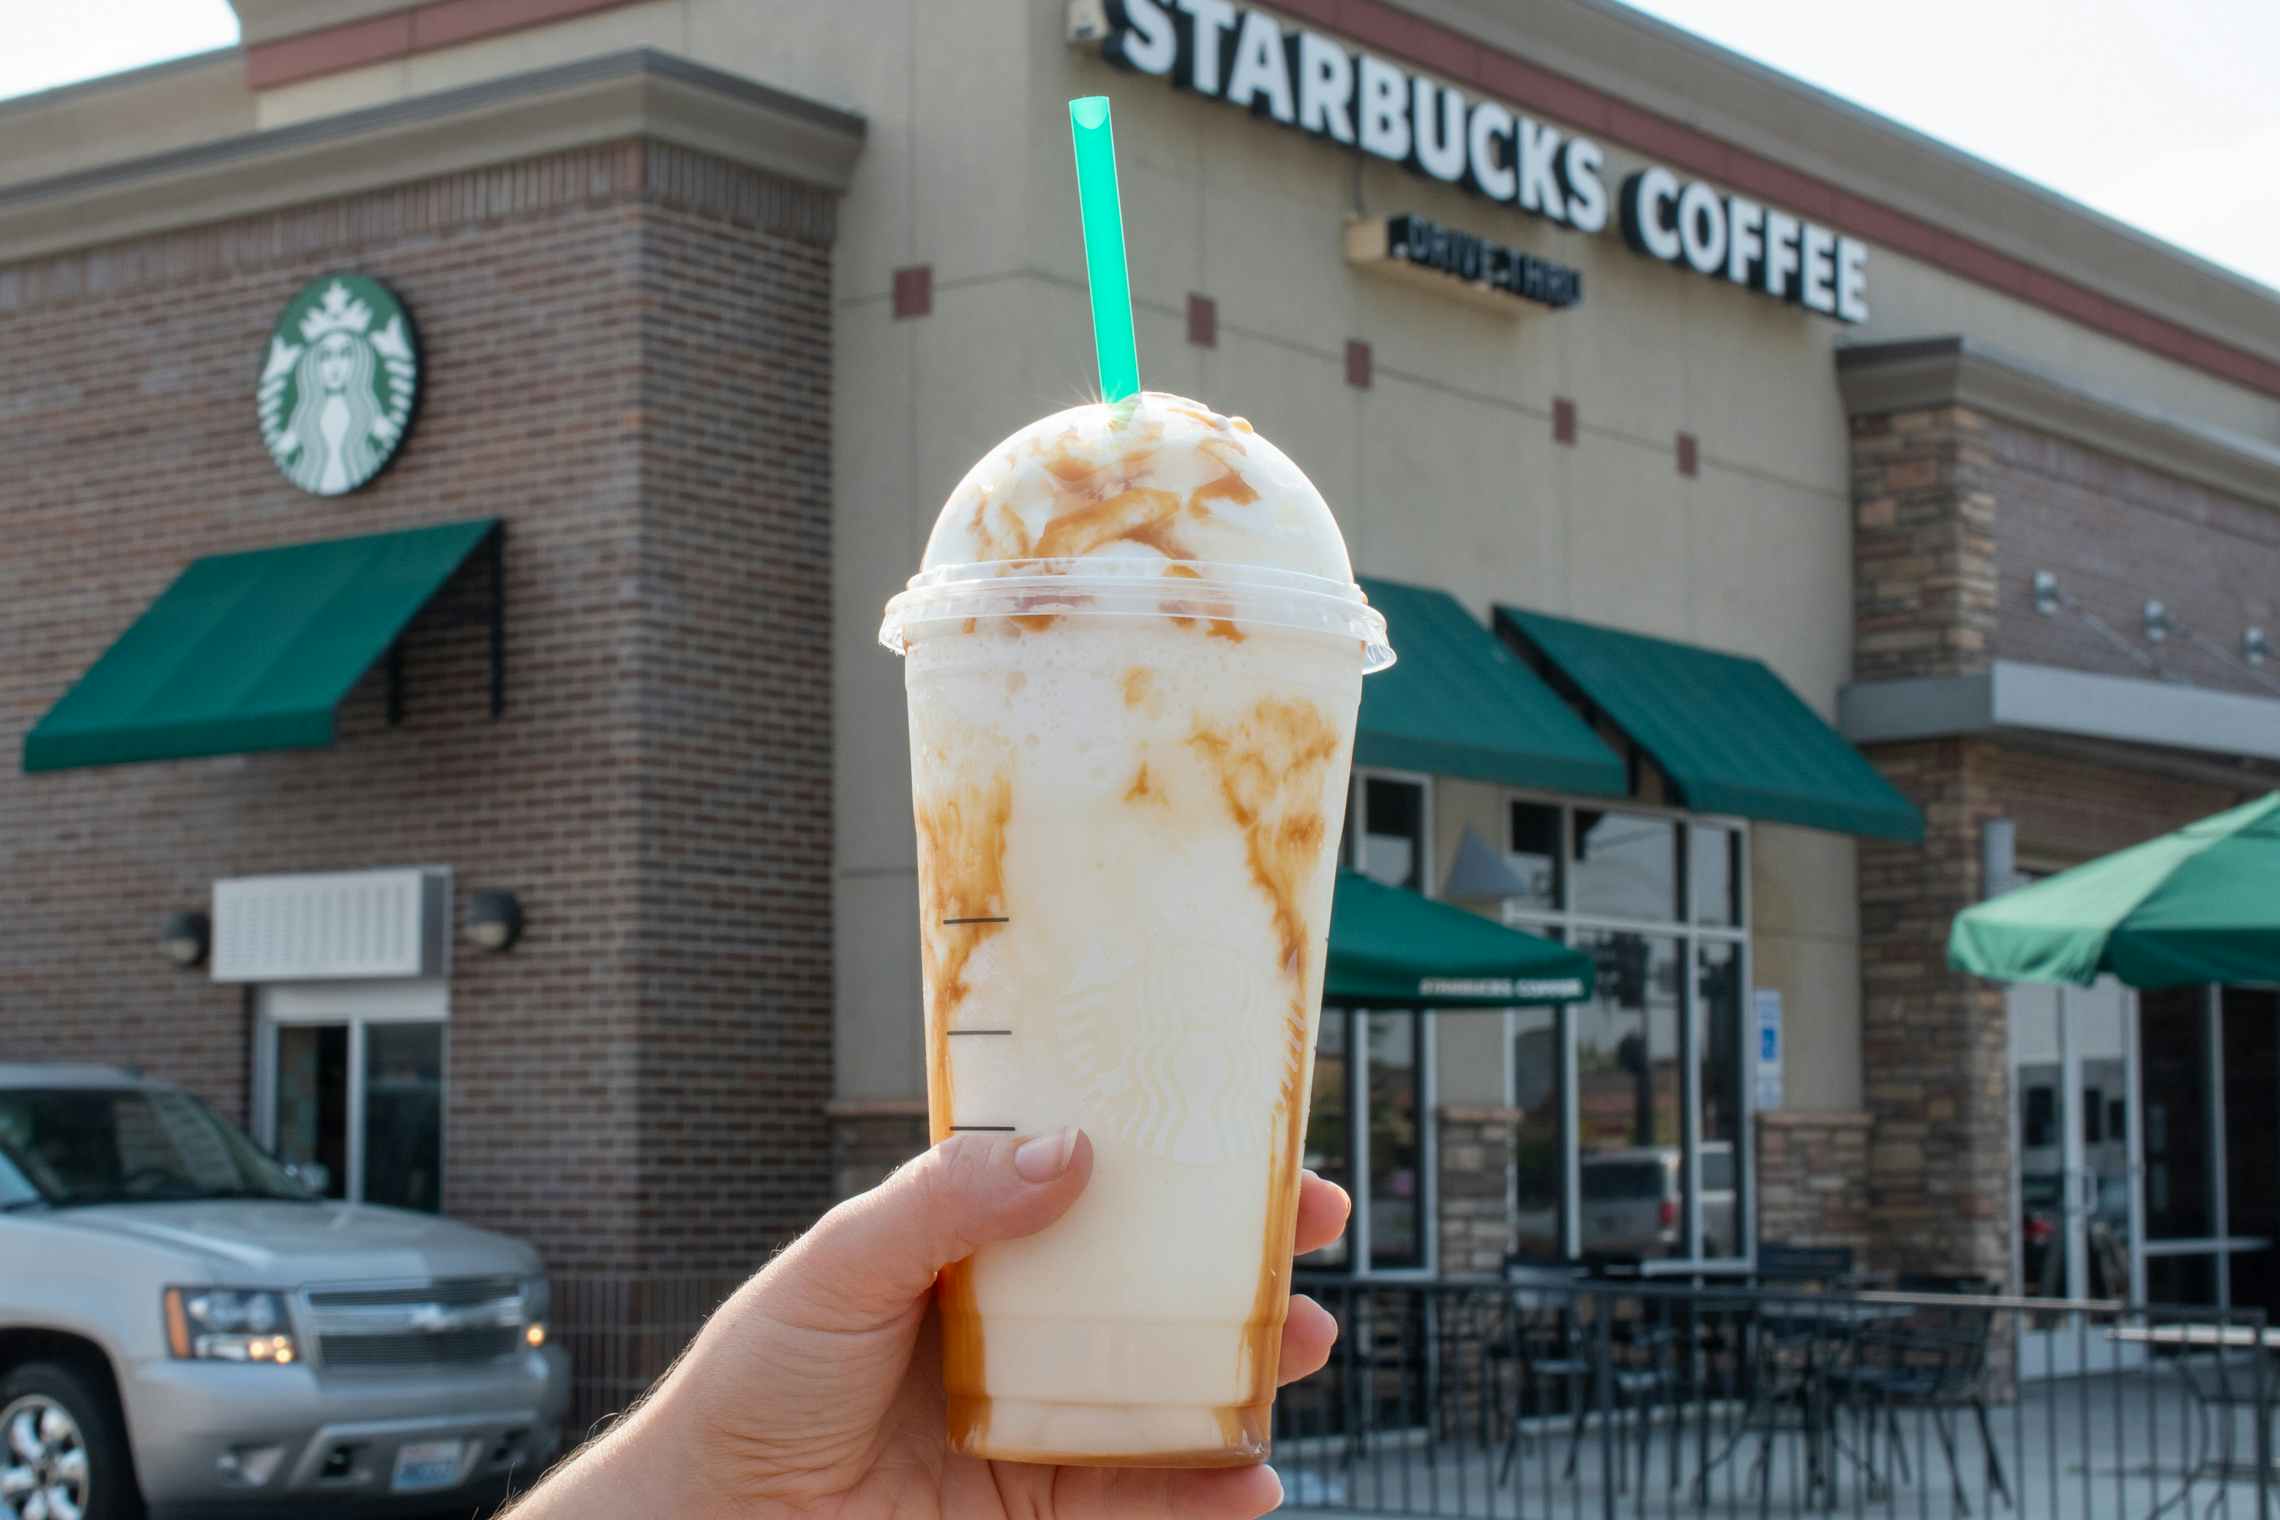 Starbucks frappuccino specialty drink held in front of a Starbucks